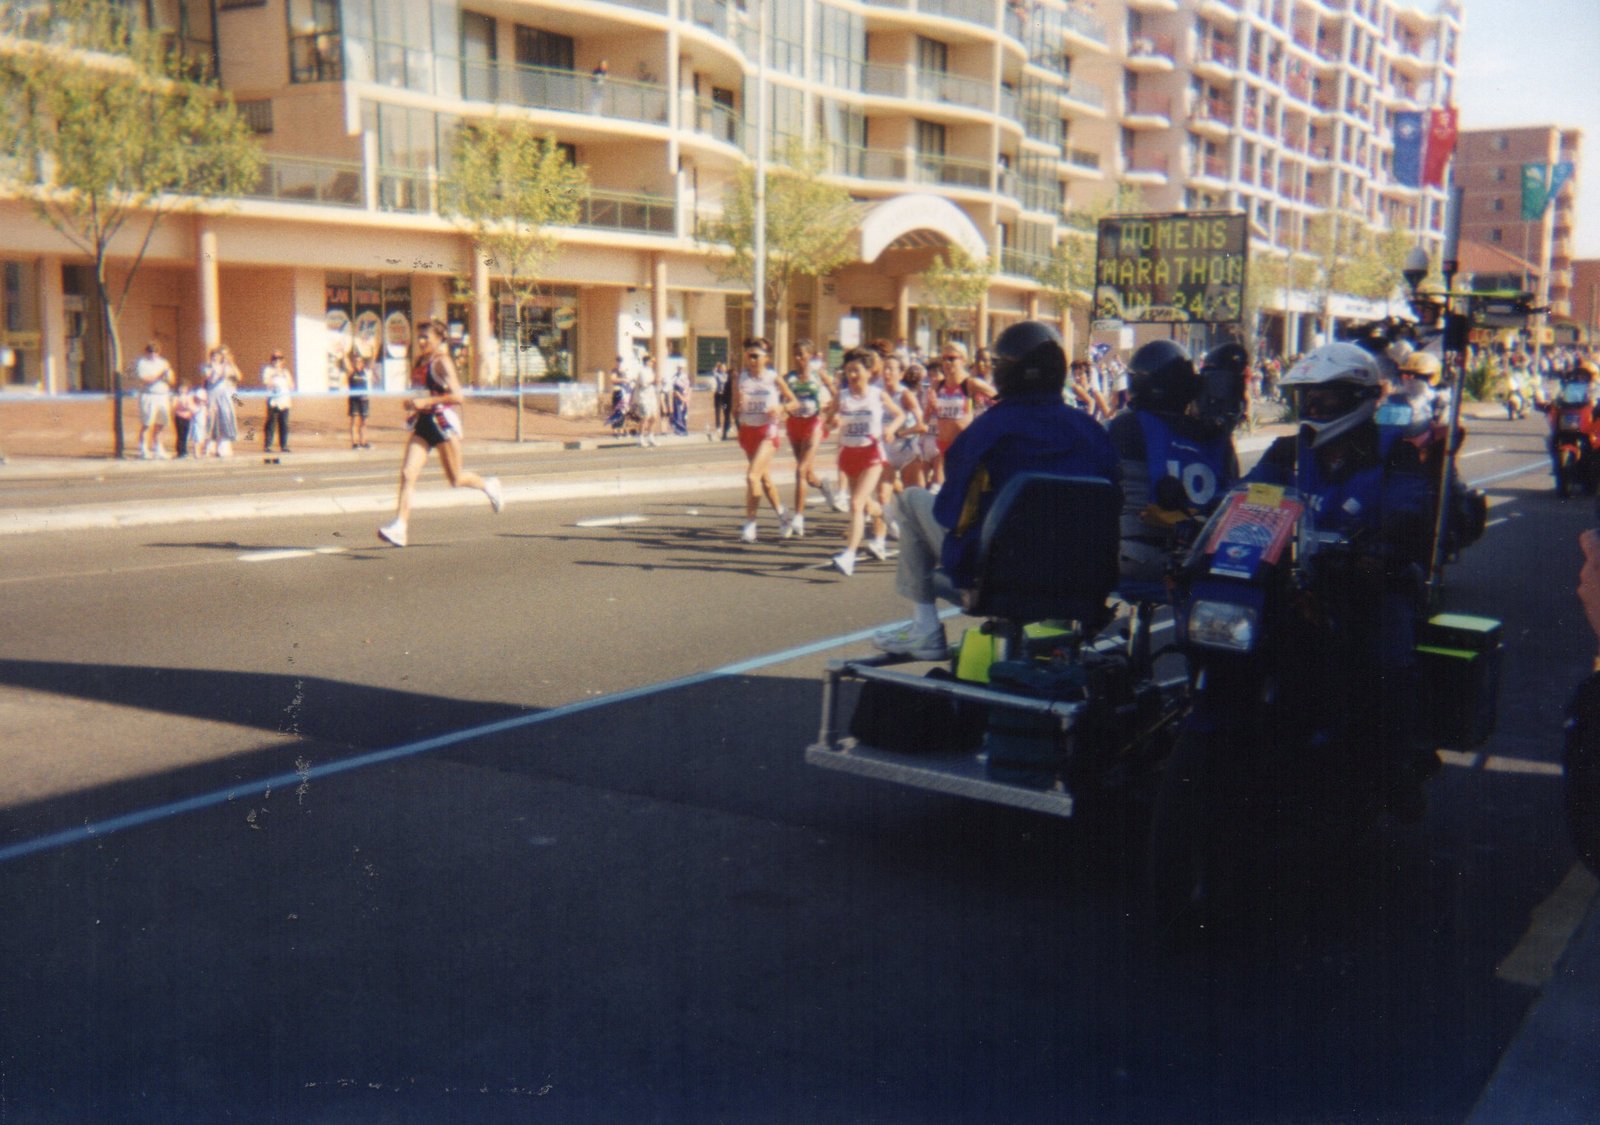 071 Driving buses in Sydney for the olympics 2000.jpg